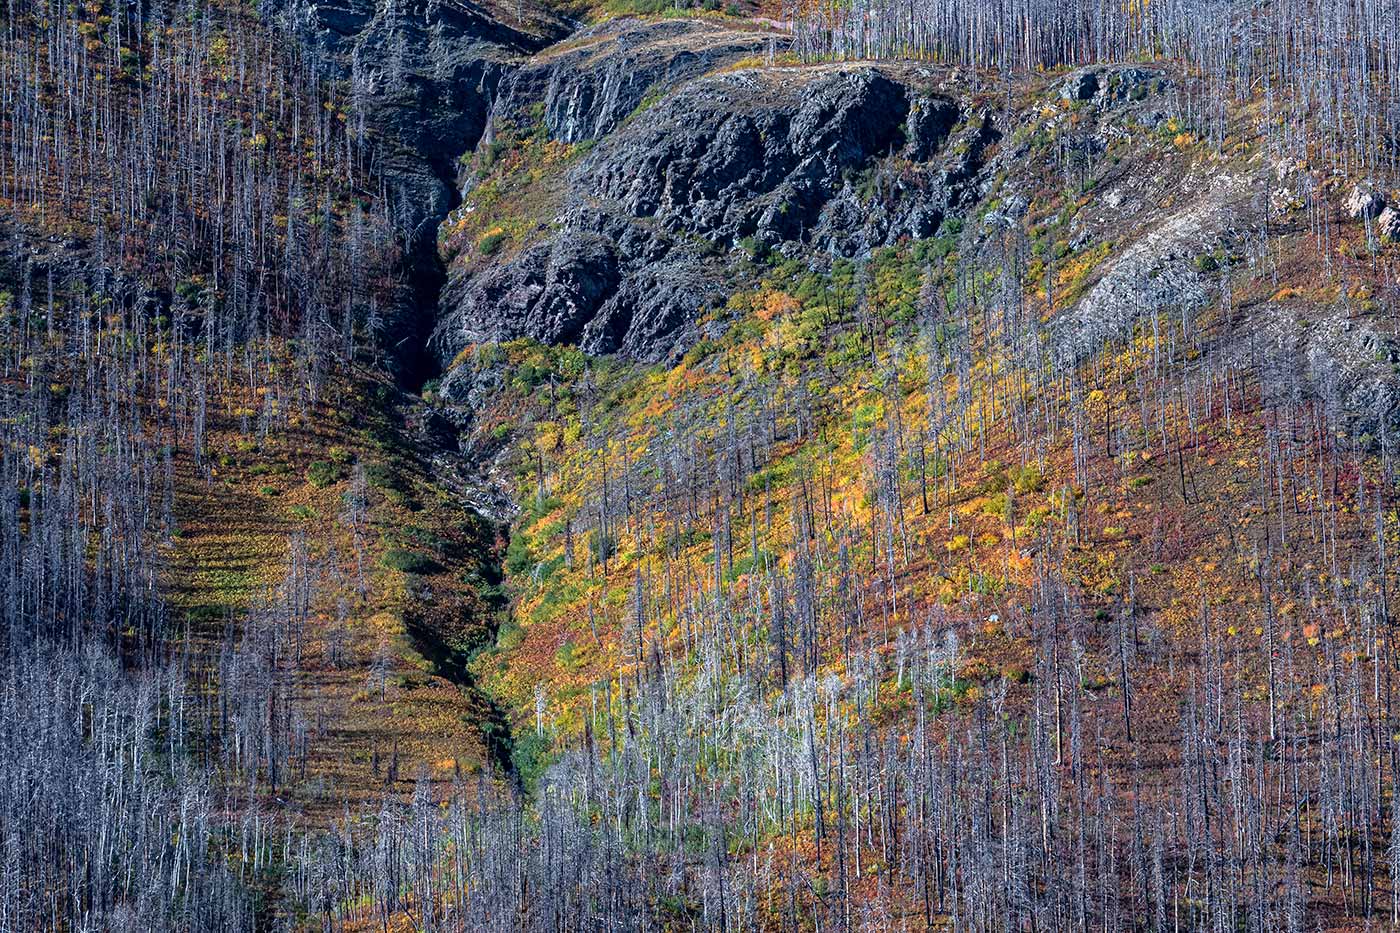 Brilliant fall colours in the burned forest understory along the Red Rock Canyon parkway